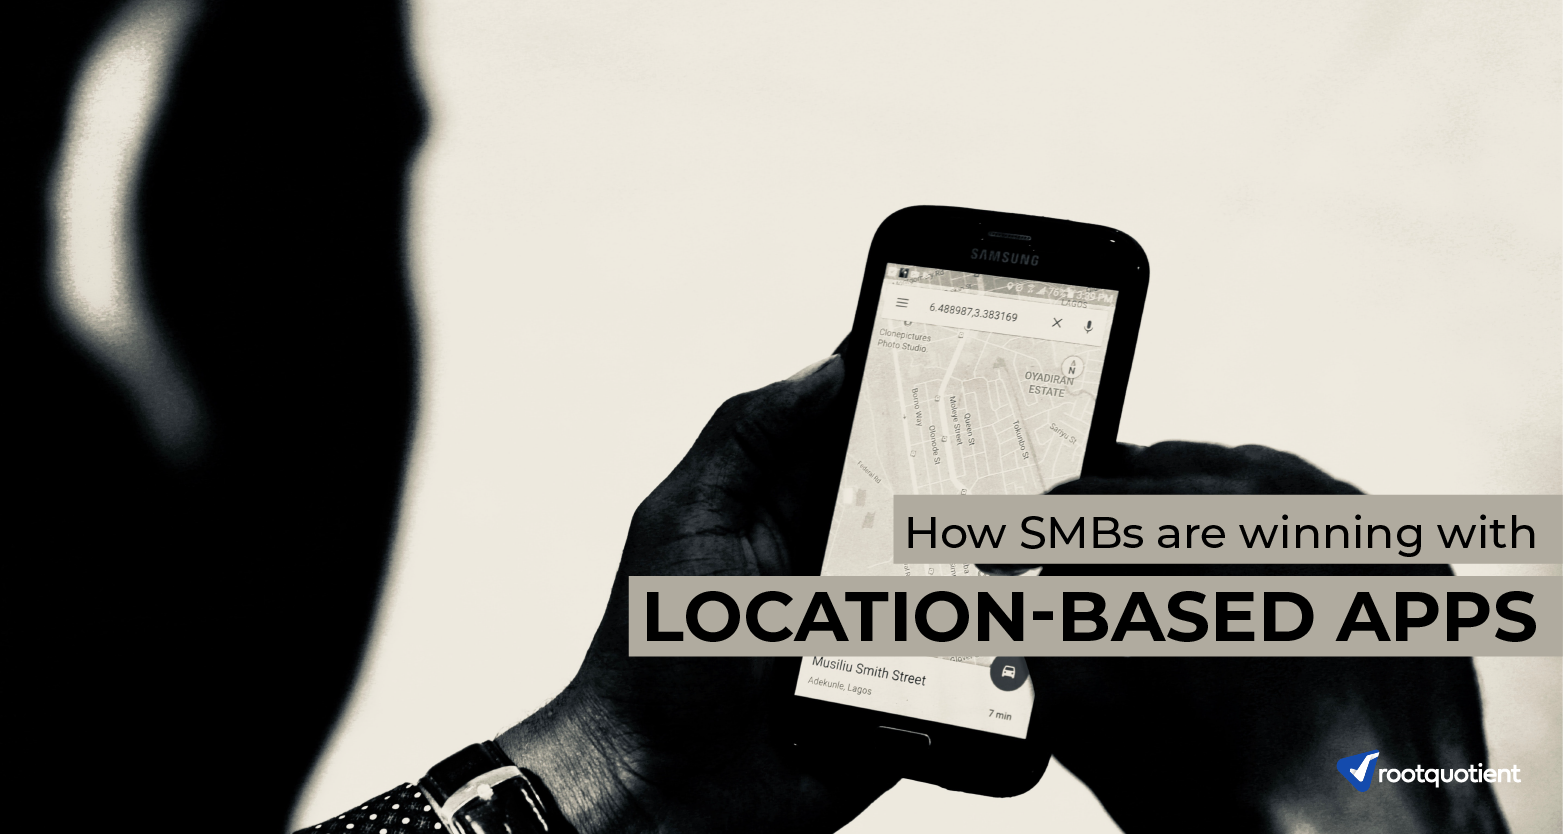 How SMBs are Winning with GPS/Location-Based Apps